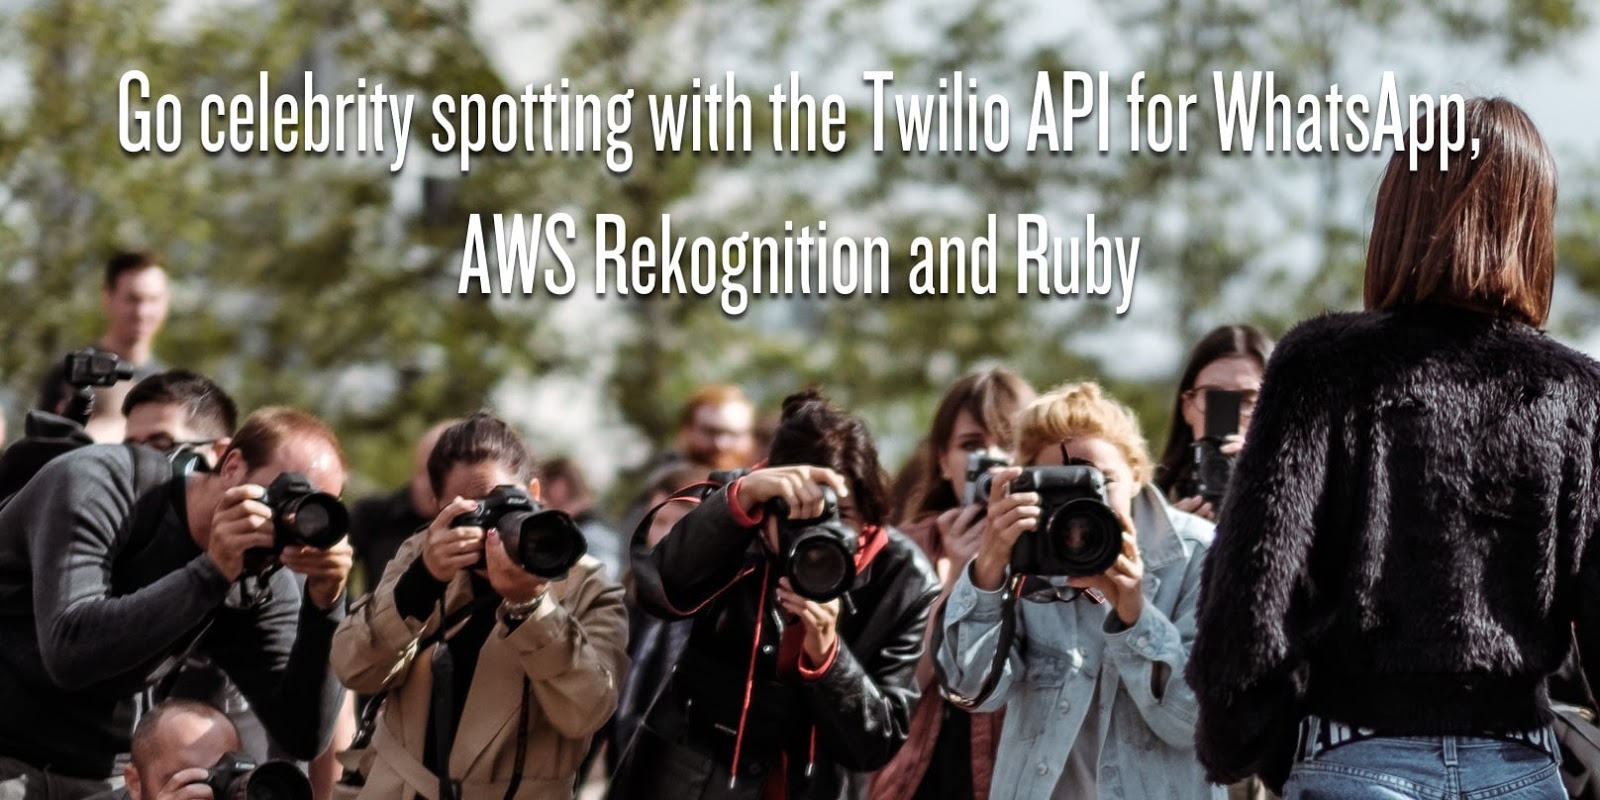 Go celebrity spotty with the Twilio API for WhatsApp, AWS Rekognition and Ruby